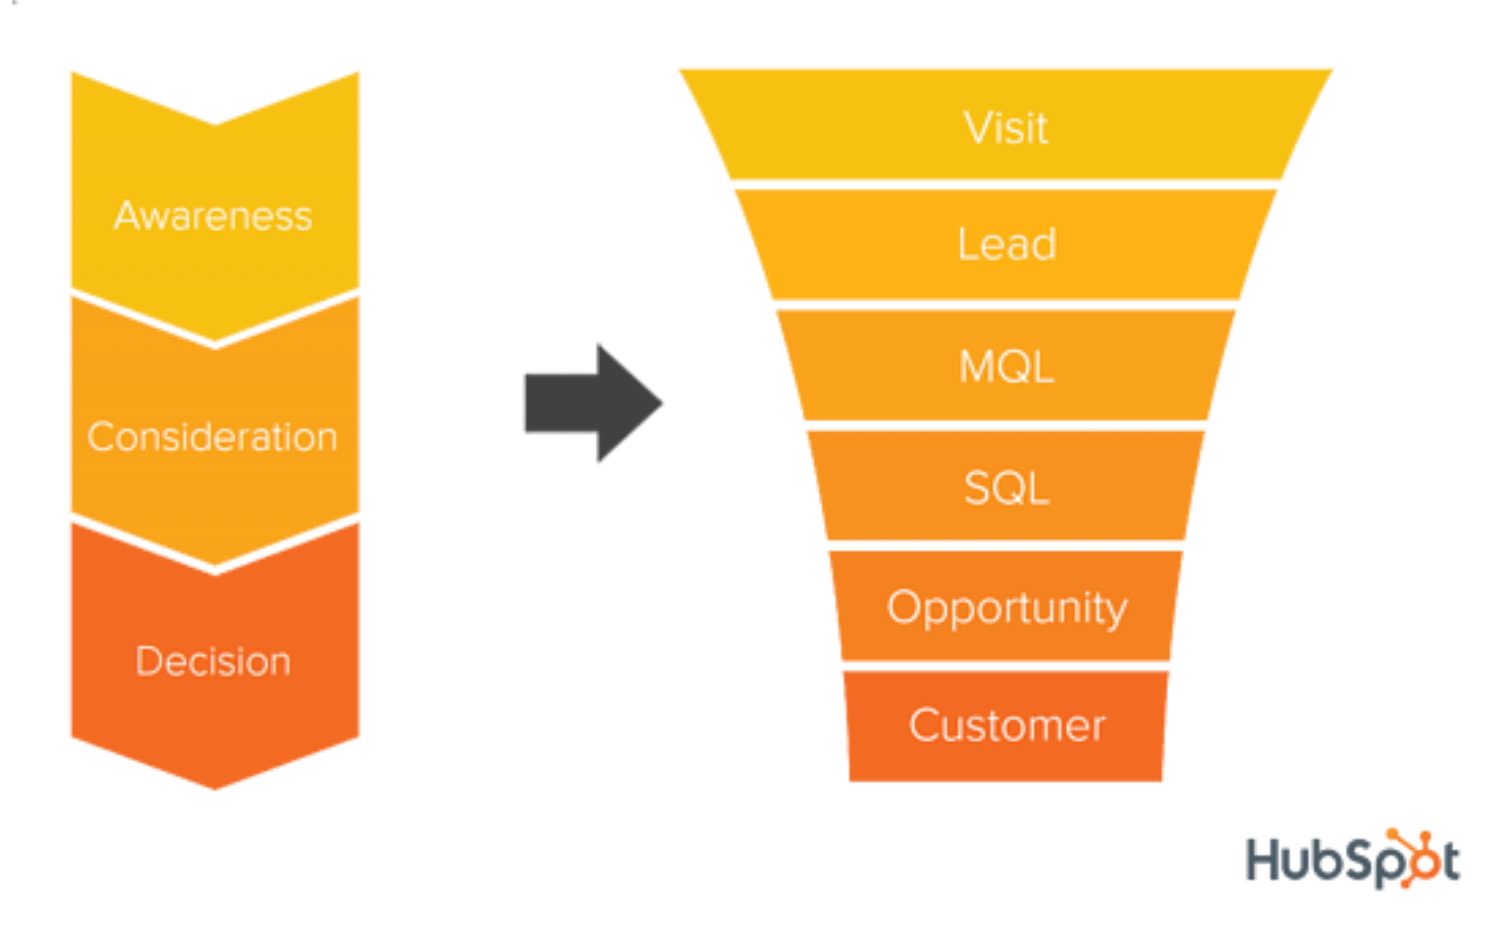 Each stage of the buyer's journey for SaaS companies